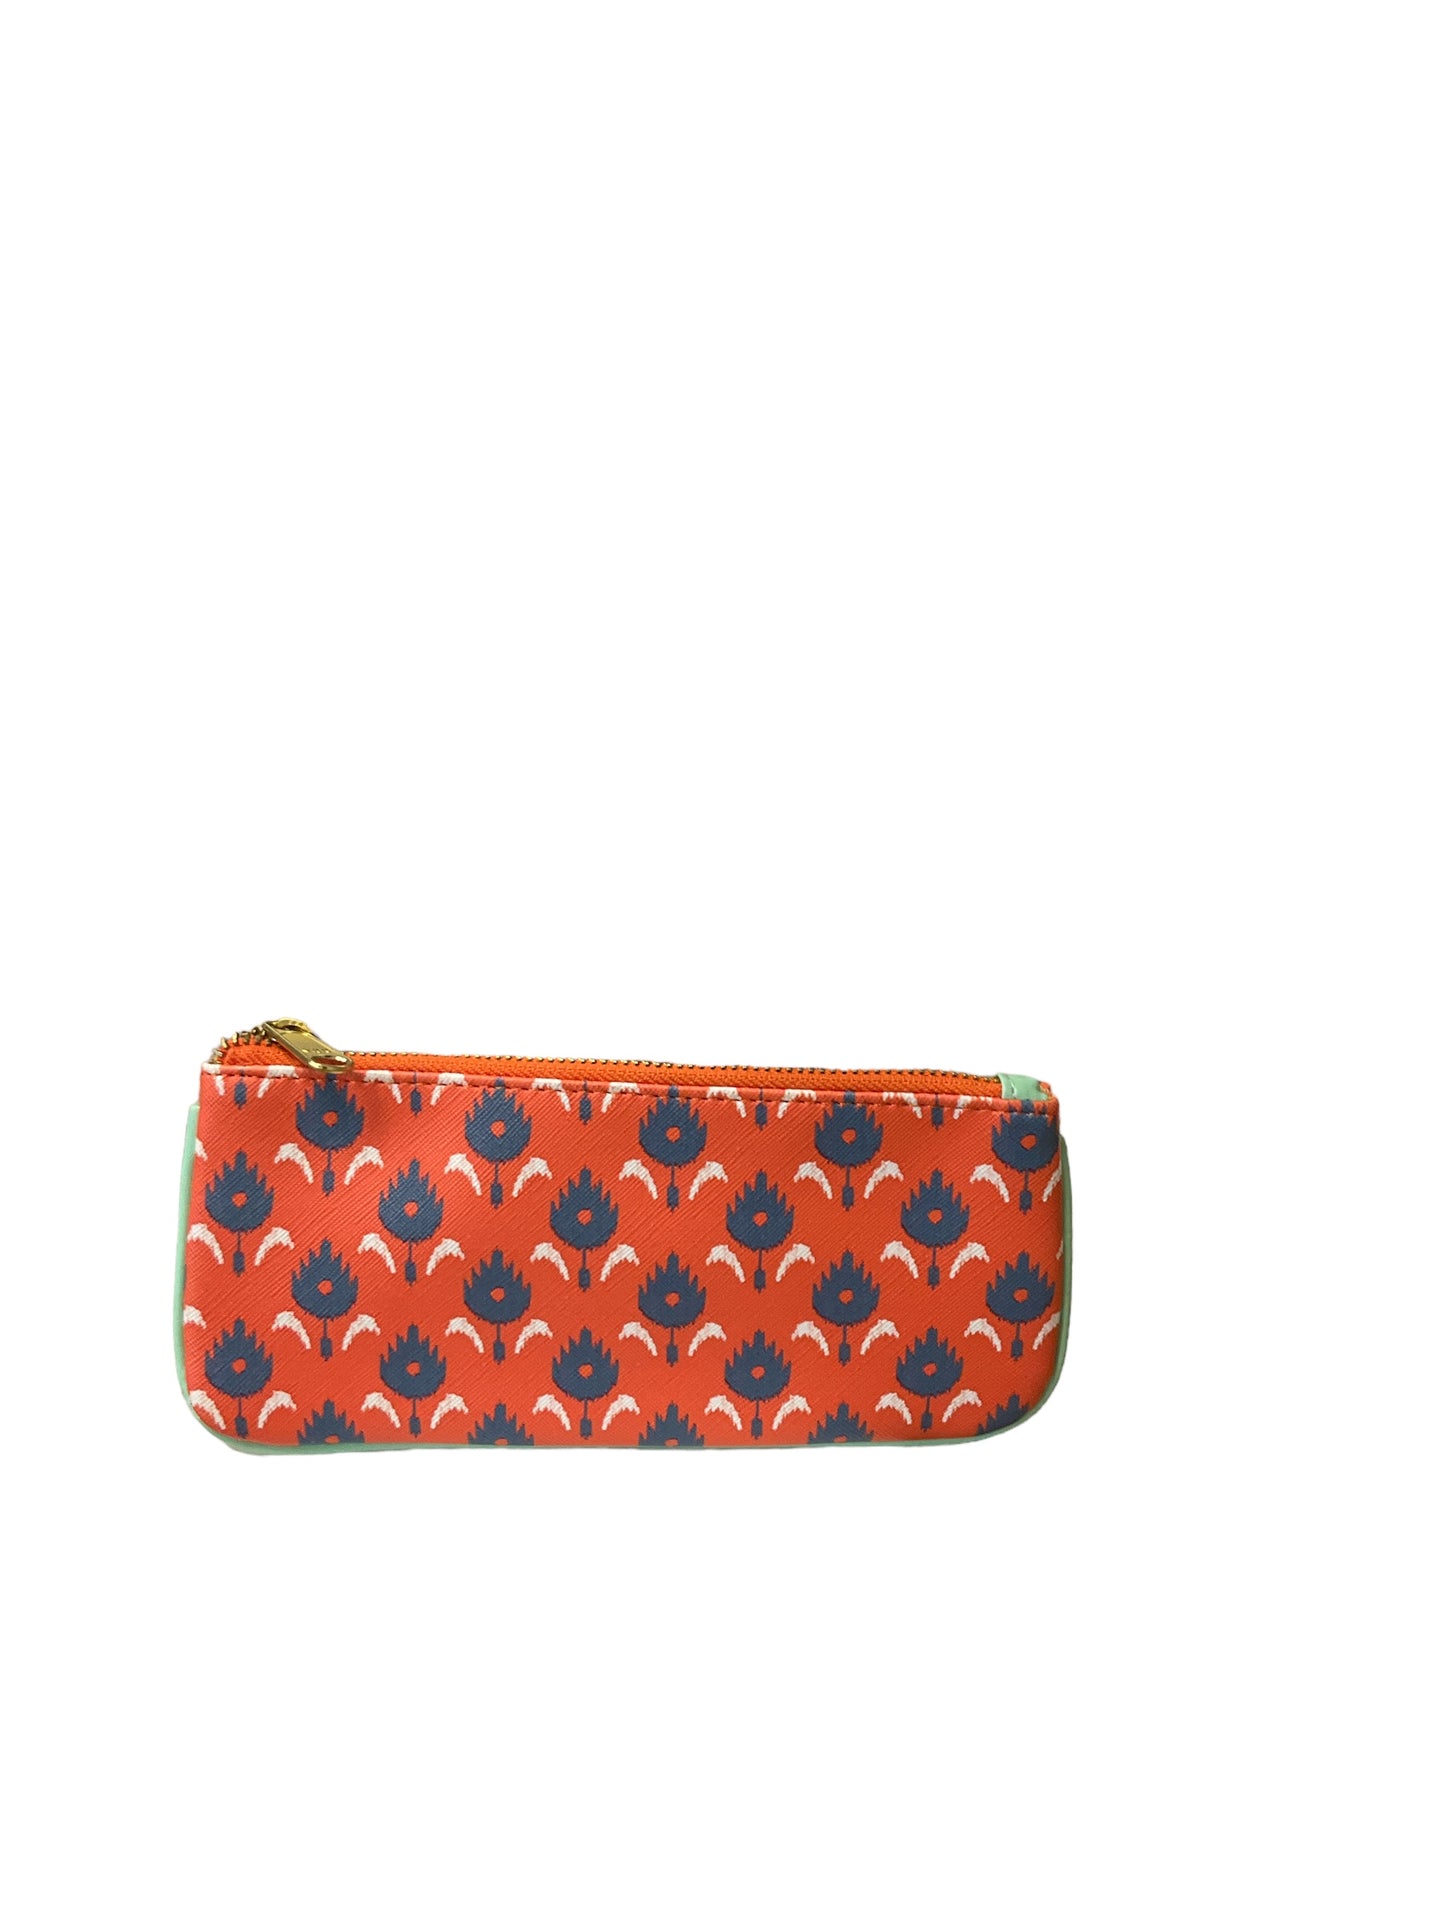 Makeup Bag By Anthropologie